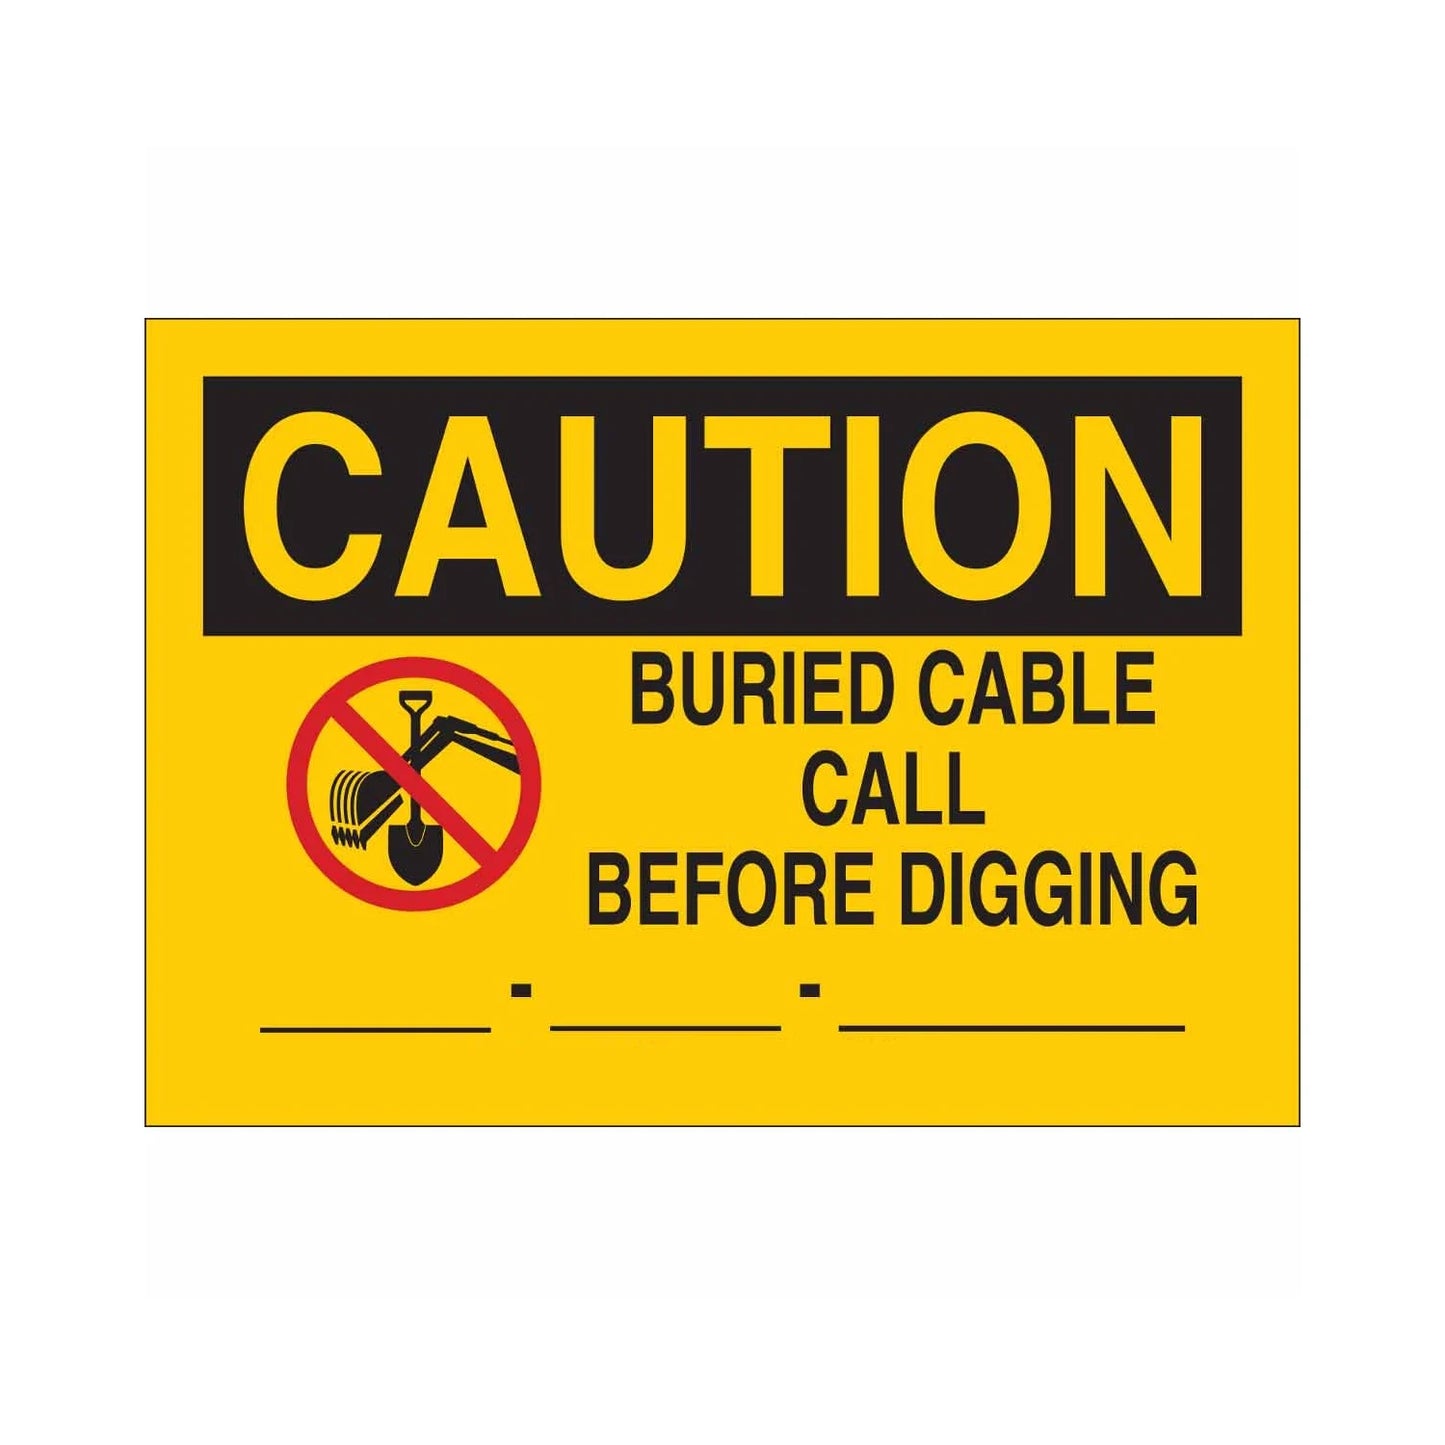 CAUTION Buried Cable Call Before Digging ____-____-____ Sign